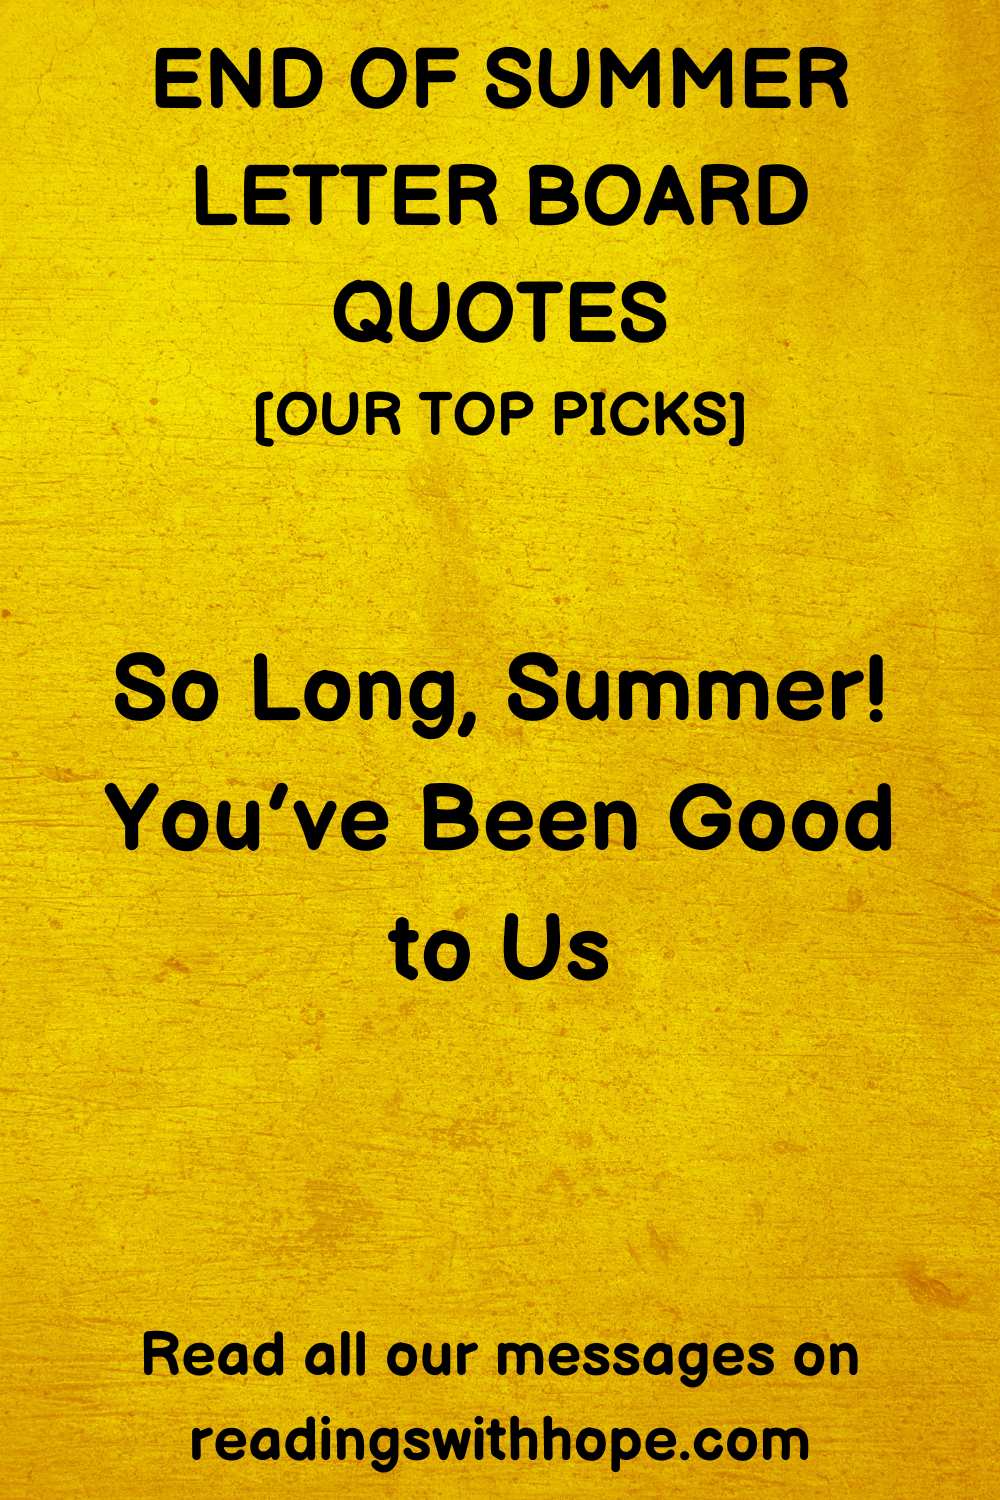 End of Summer Letter Board Quotes